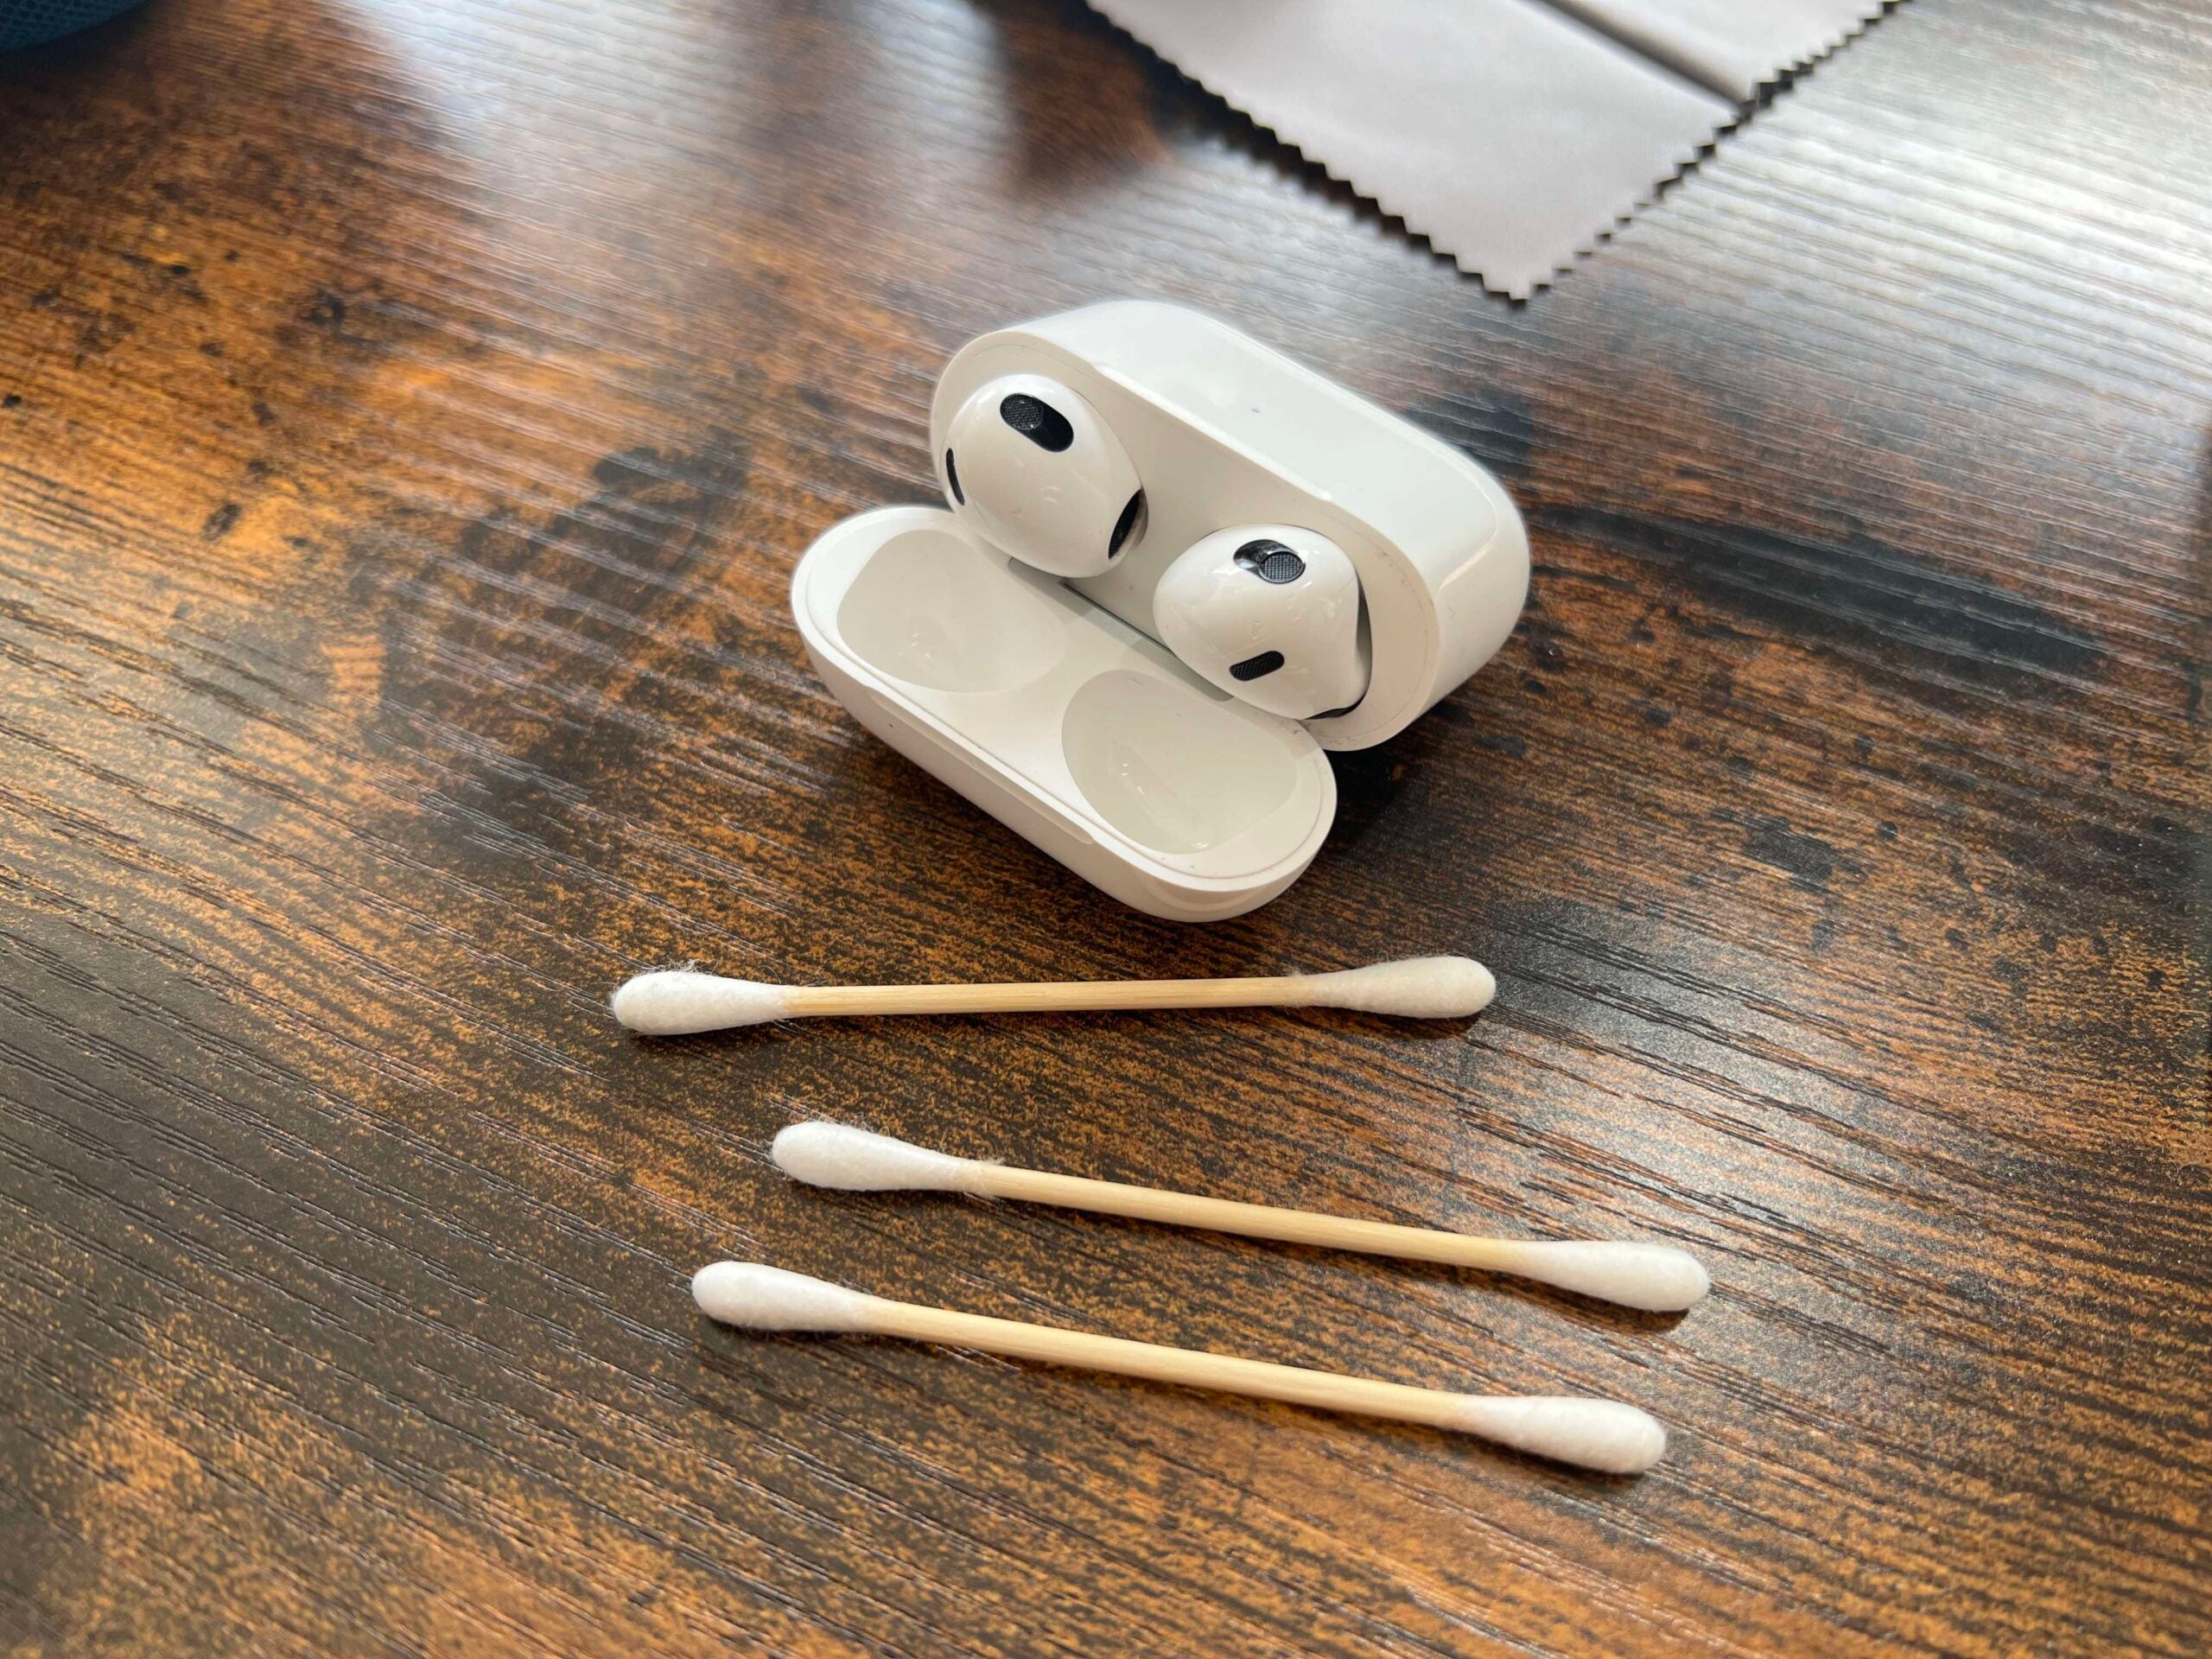 AirPods cleaning use a stick